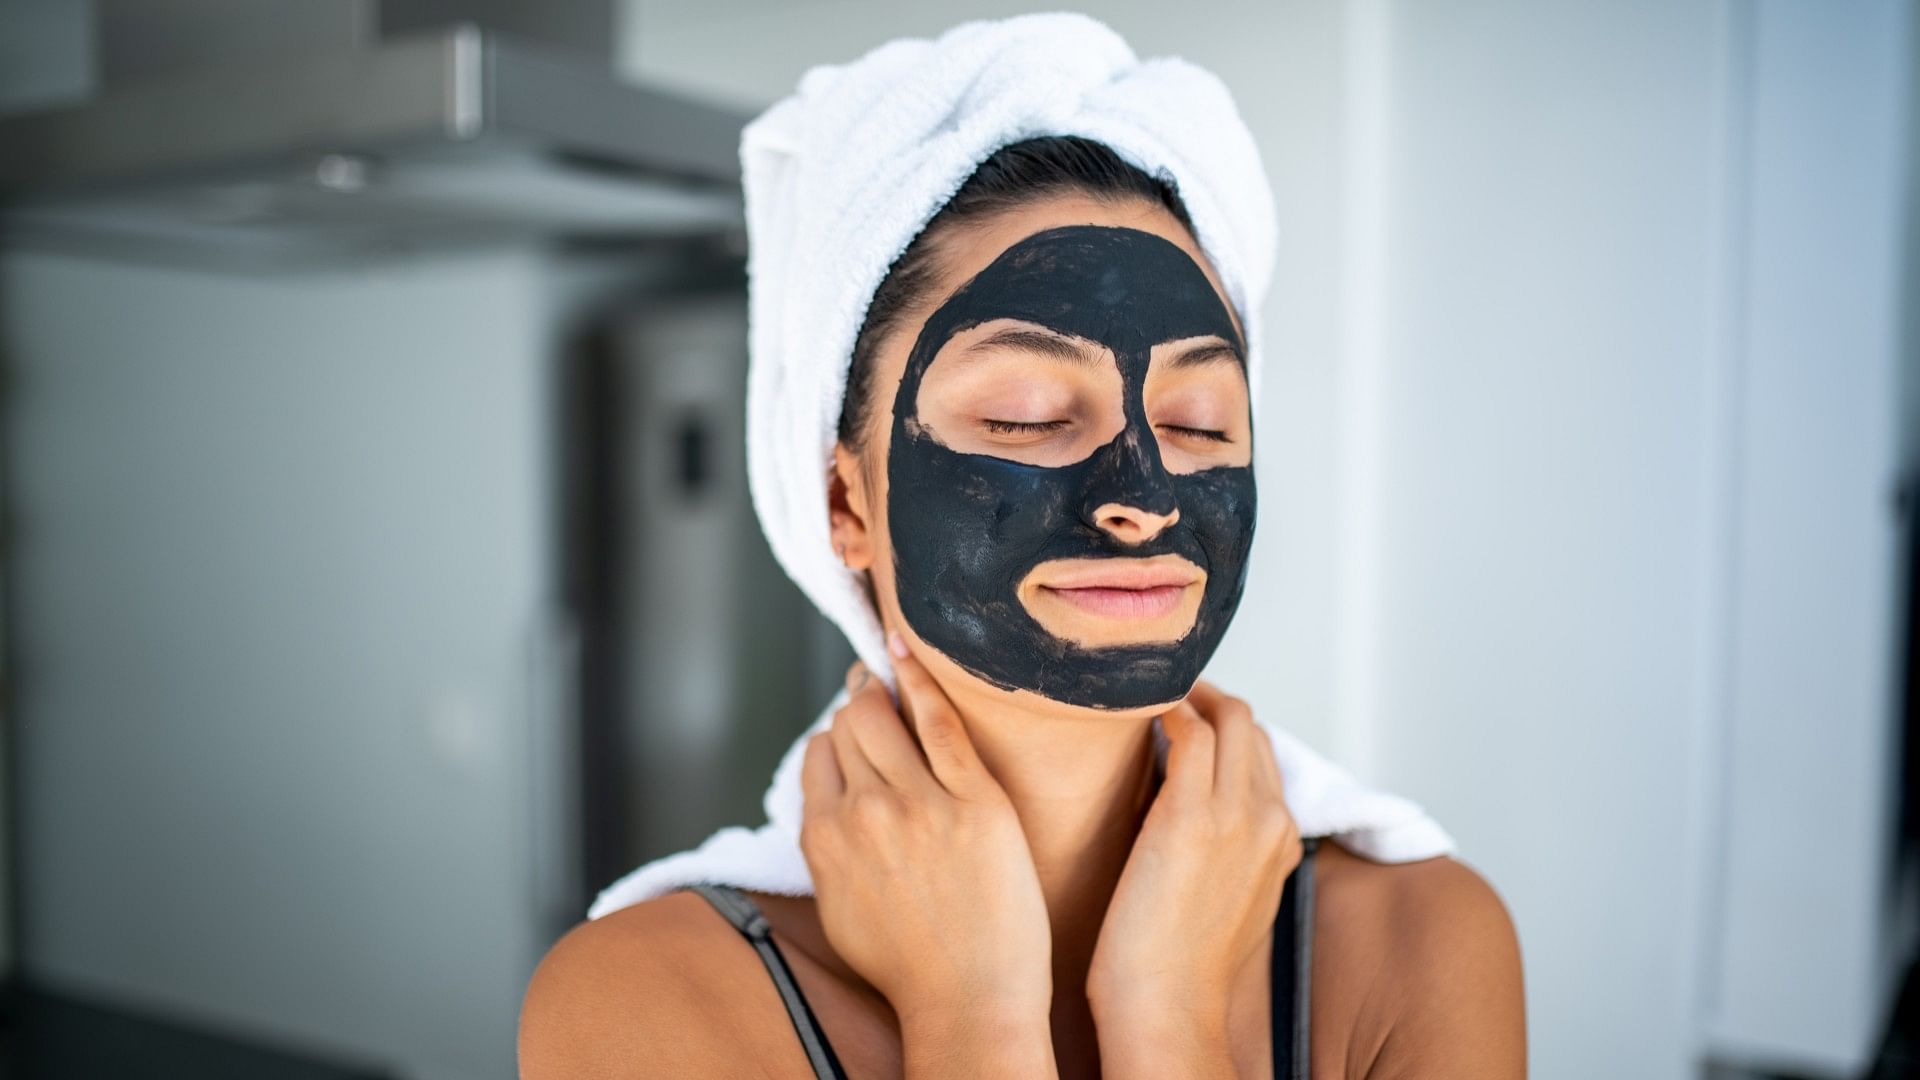 Charcoal Ke Fayde Know The Benefits Of Charcoal For Glowing Skin In Hindi